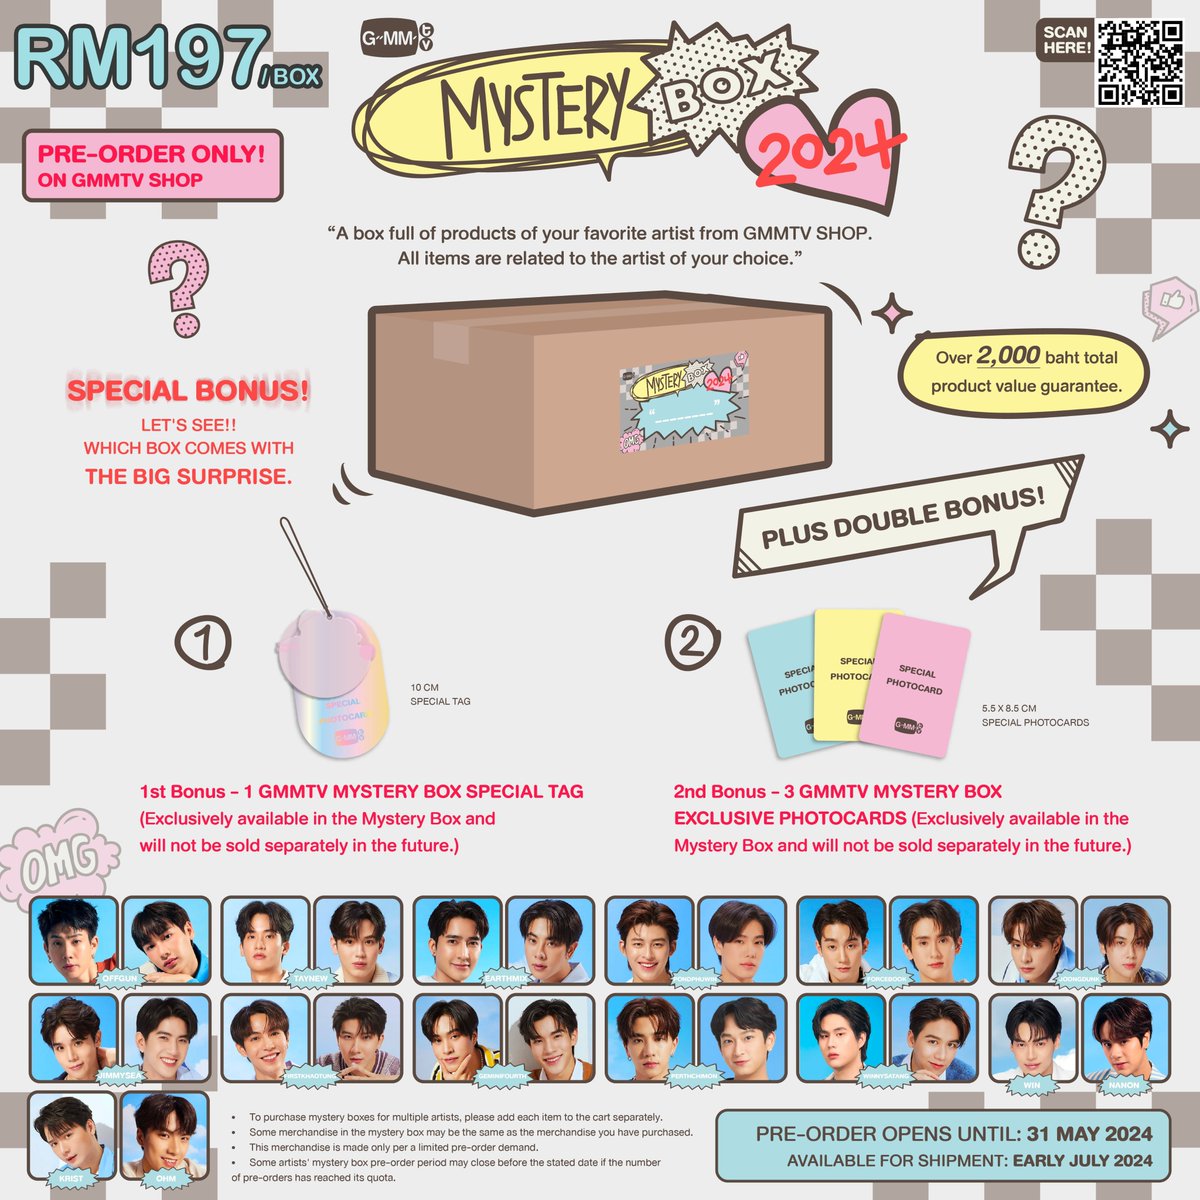 🇲🇾 G.O #NNNWISHESGO

[PRE-ORDER]
GMMTV MYSTERY BOX 2024 (LIMITED QUANTITY)
• RM197

💌 DM to order
‼️Need 2nd Payment
📍Deadline: 30 May 2024
#PasarBL
#GMMTVMYSTERYBOX2024